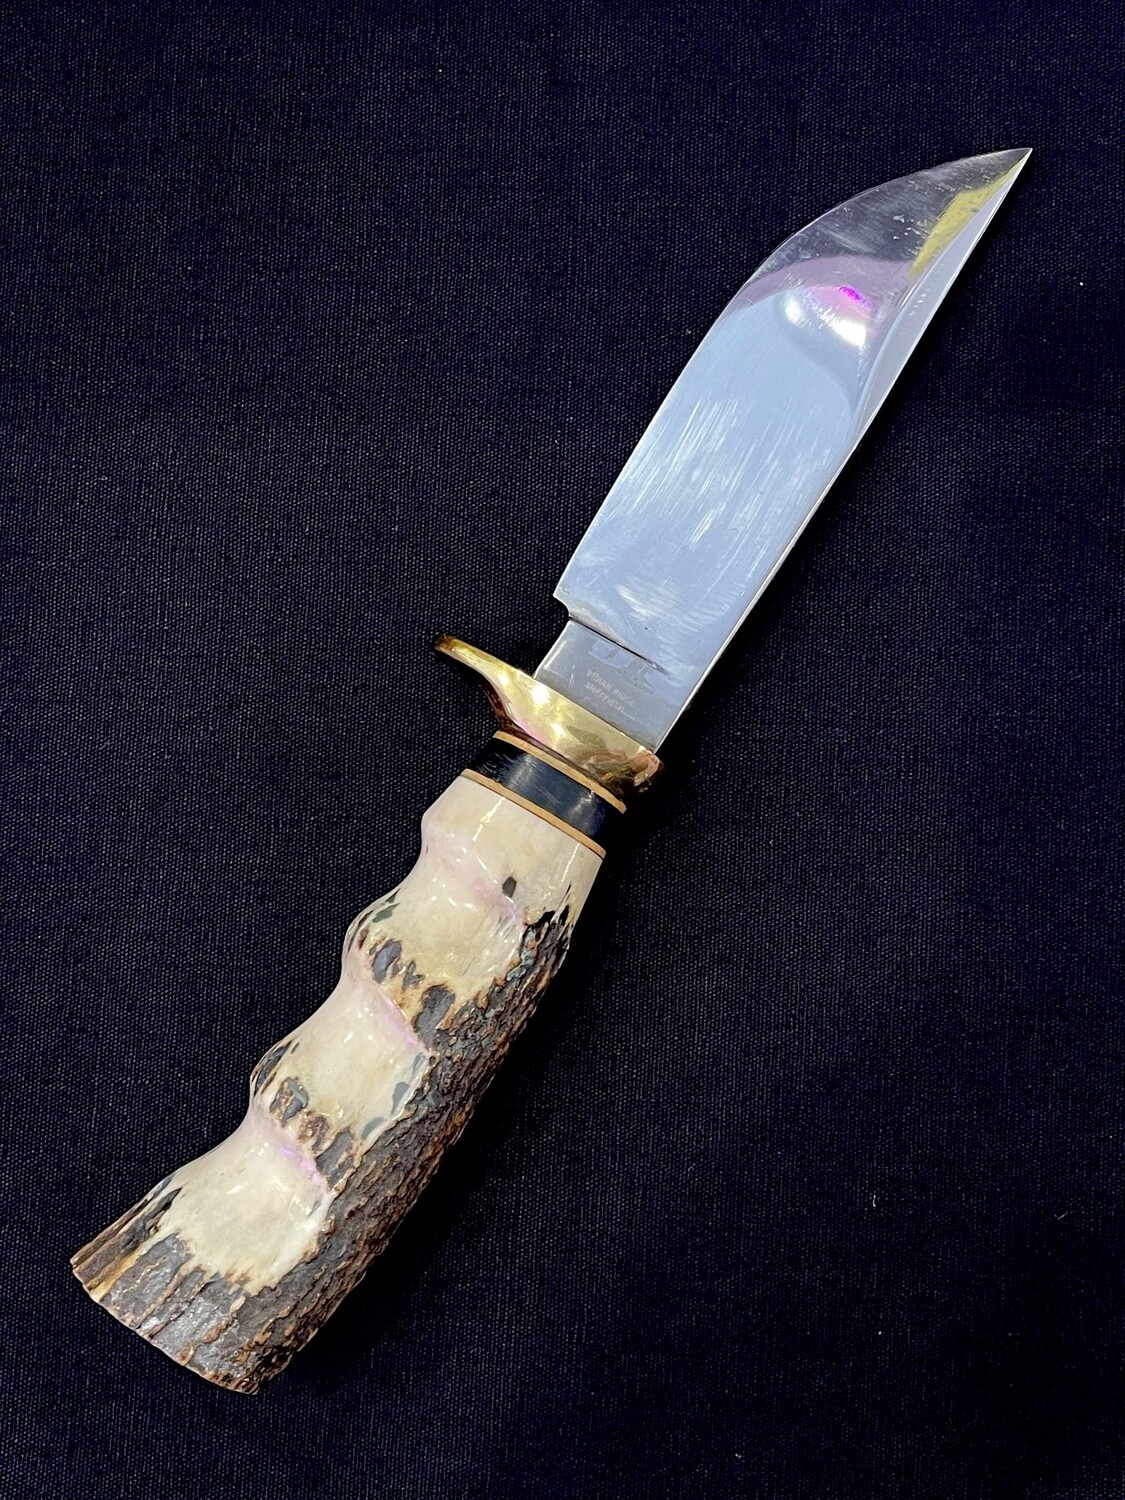 Hand Crafted Athame